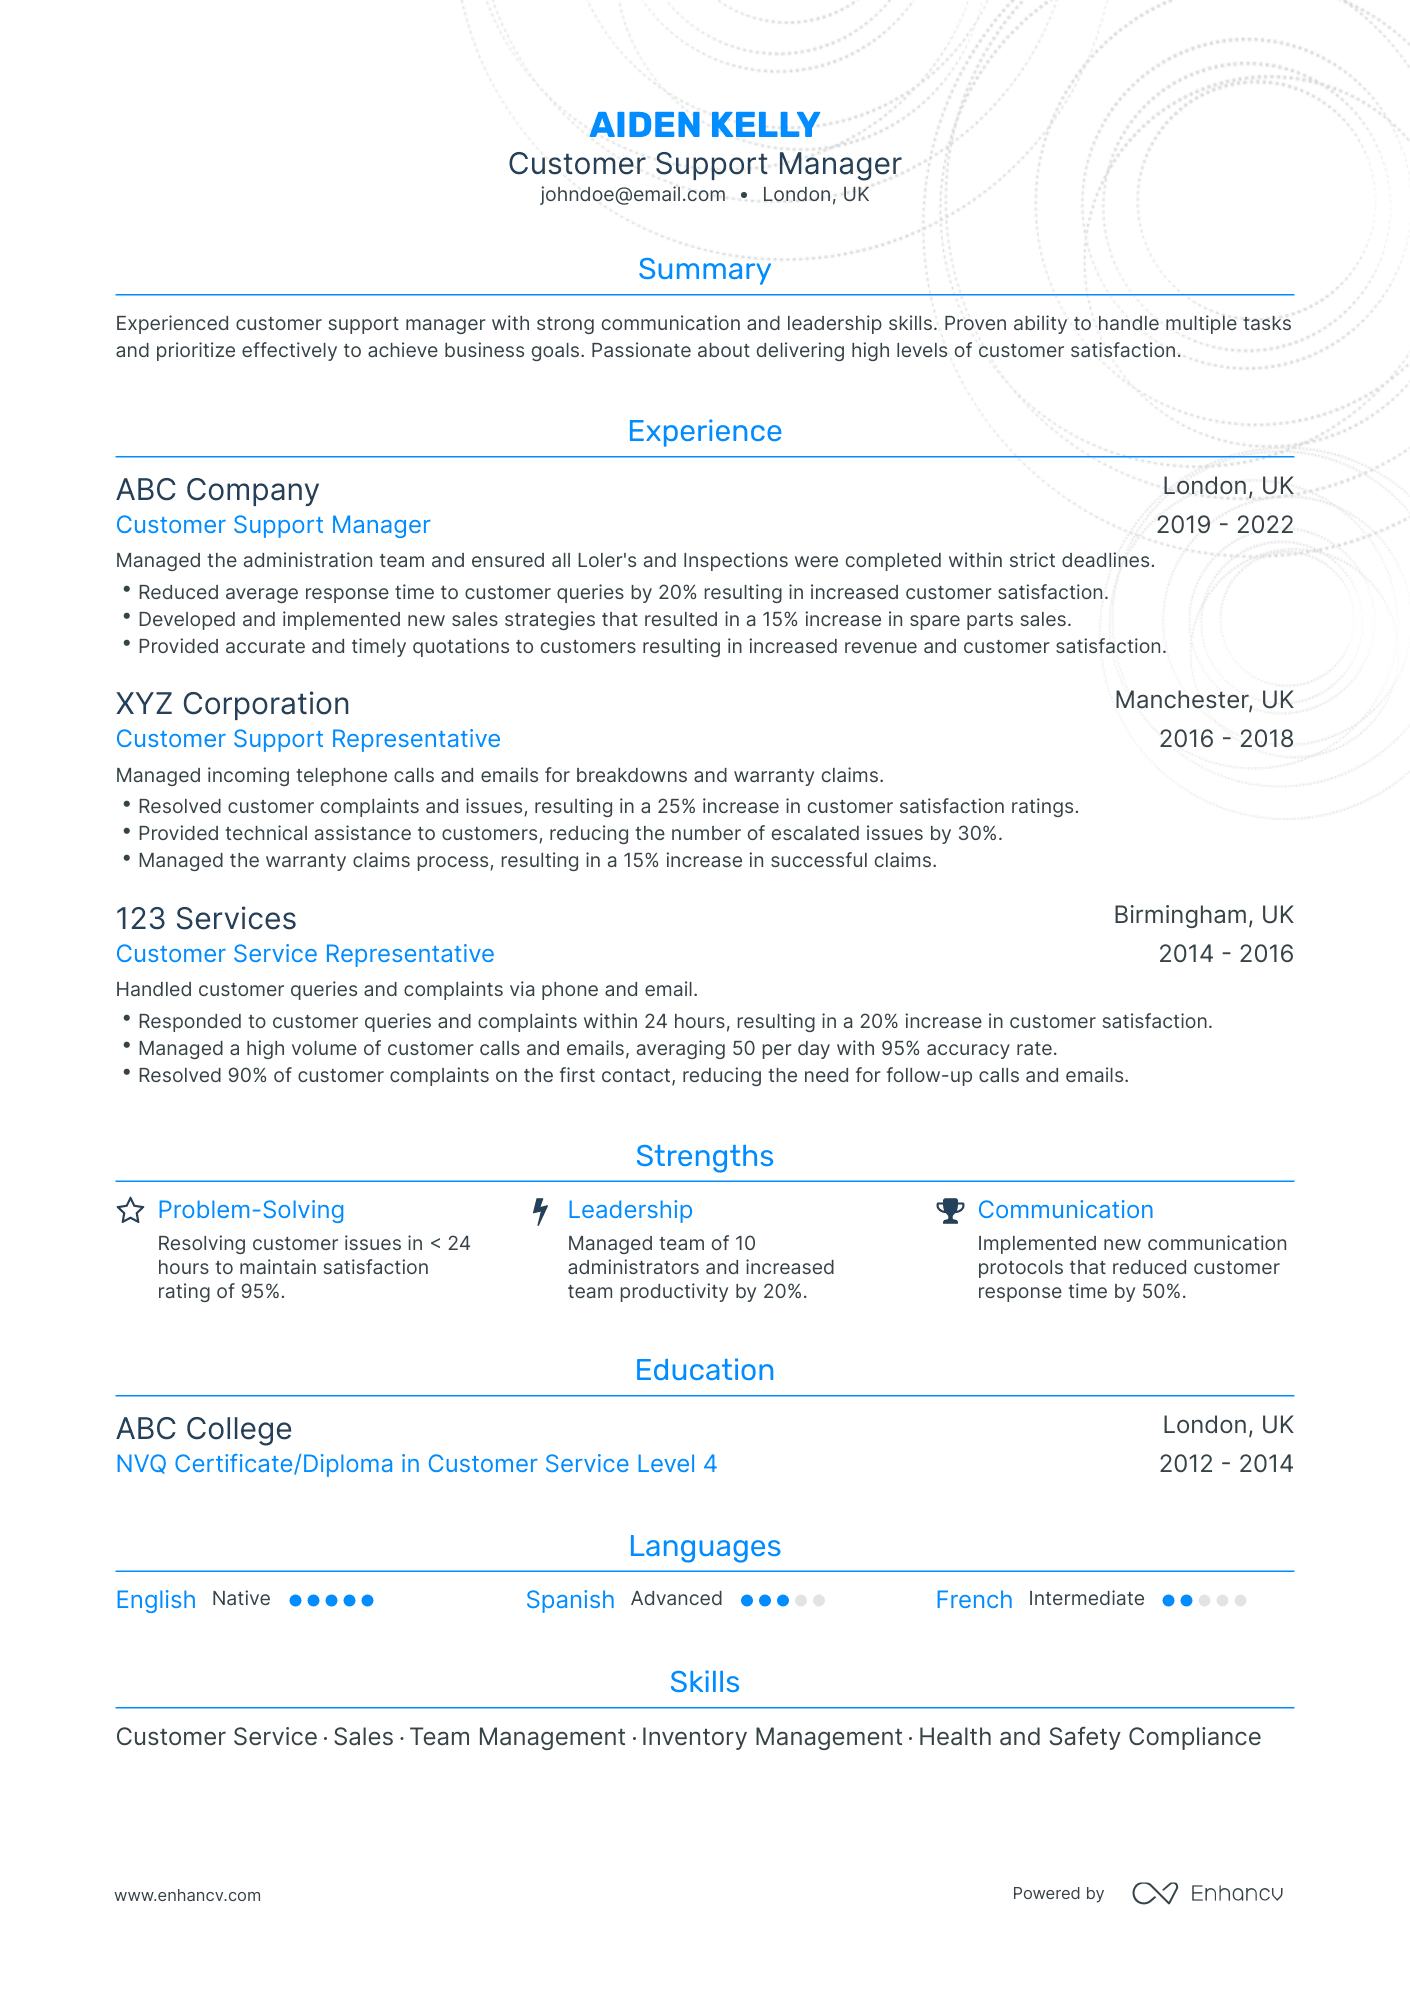 Traditional Customer Support Manager Resume Template